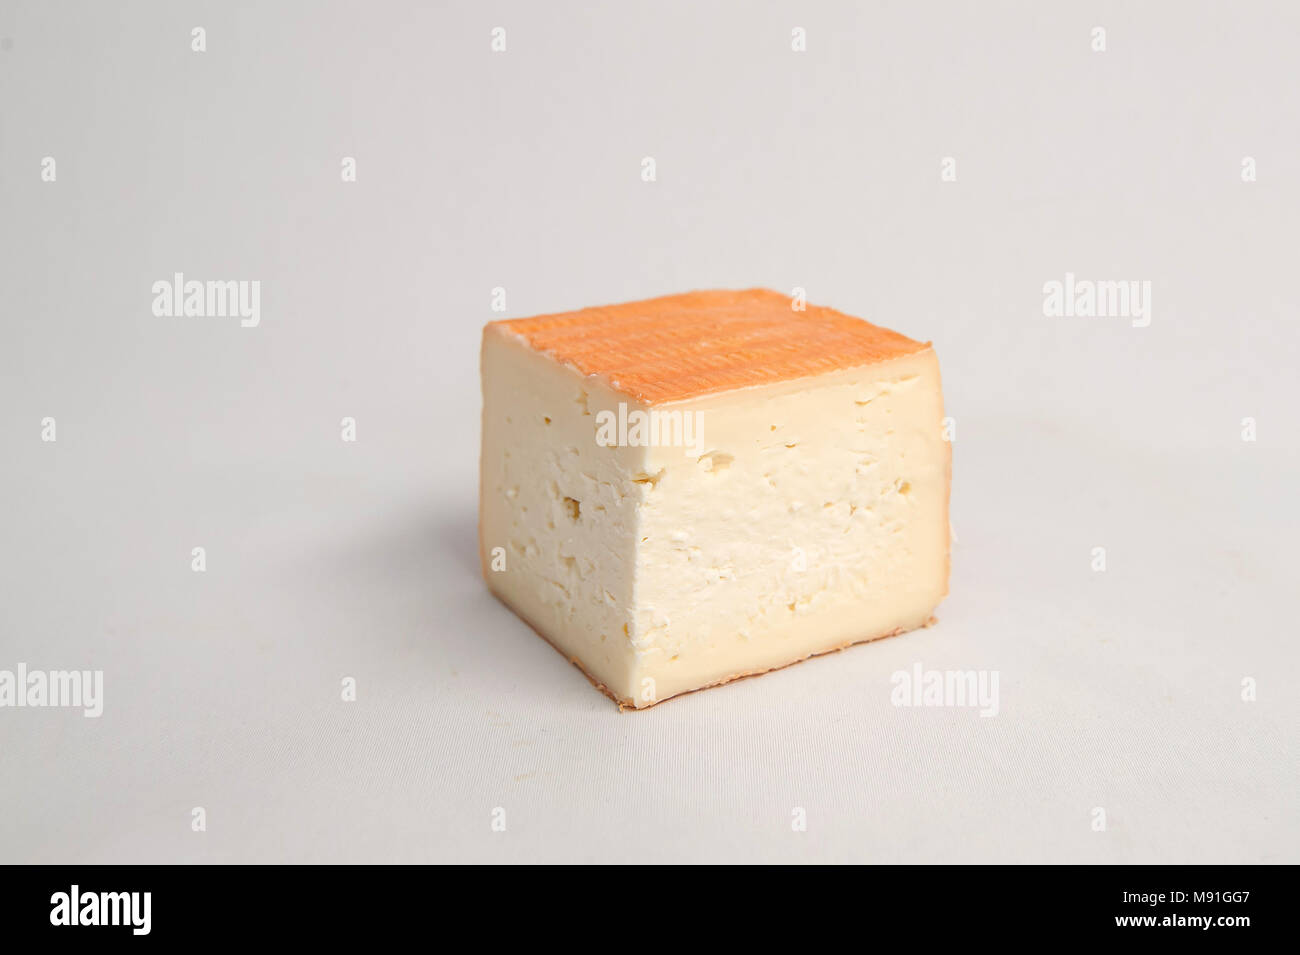 Maroilles red brick square cheese france Stock Photo